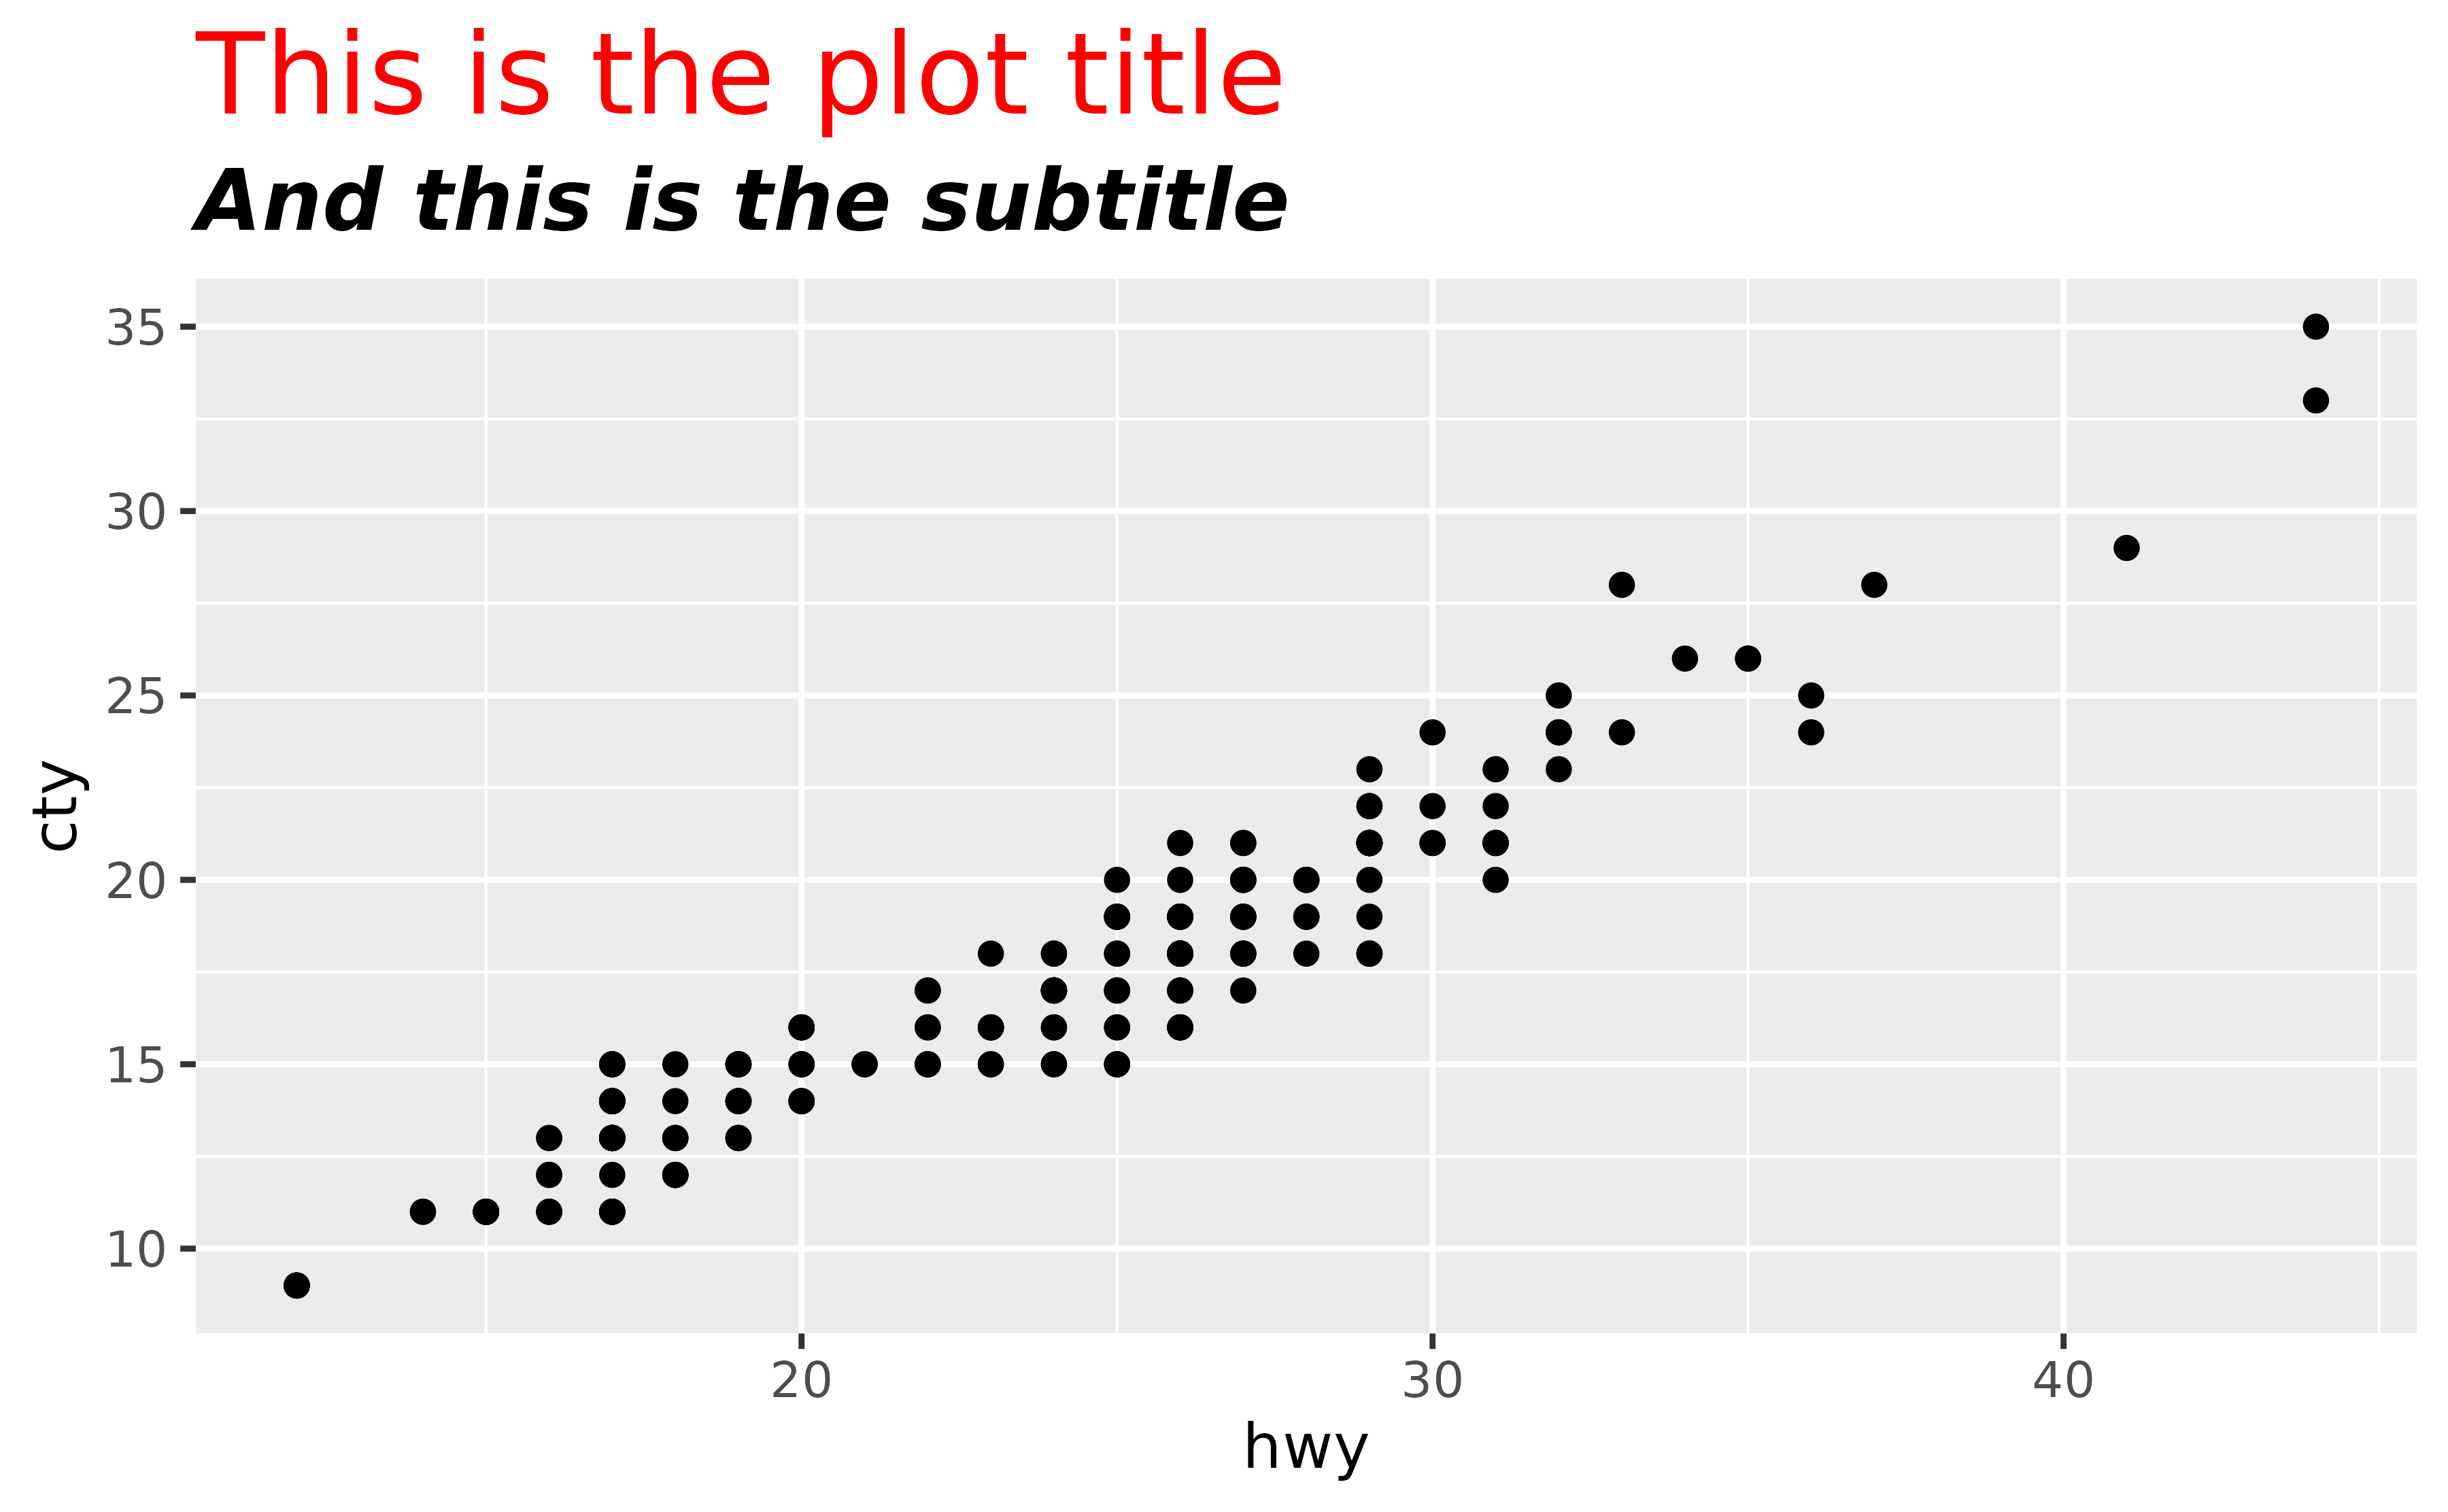 A scatter plot showing the highway miles per gallon on the x-axis and city miles per gallon on the y-axis. The plot has a large red title displaying 'This is the plot title' and a less large subtitle in bold and italic displaying 'And this is the subtitle' at the top of the plot.